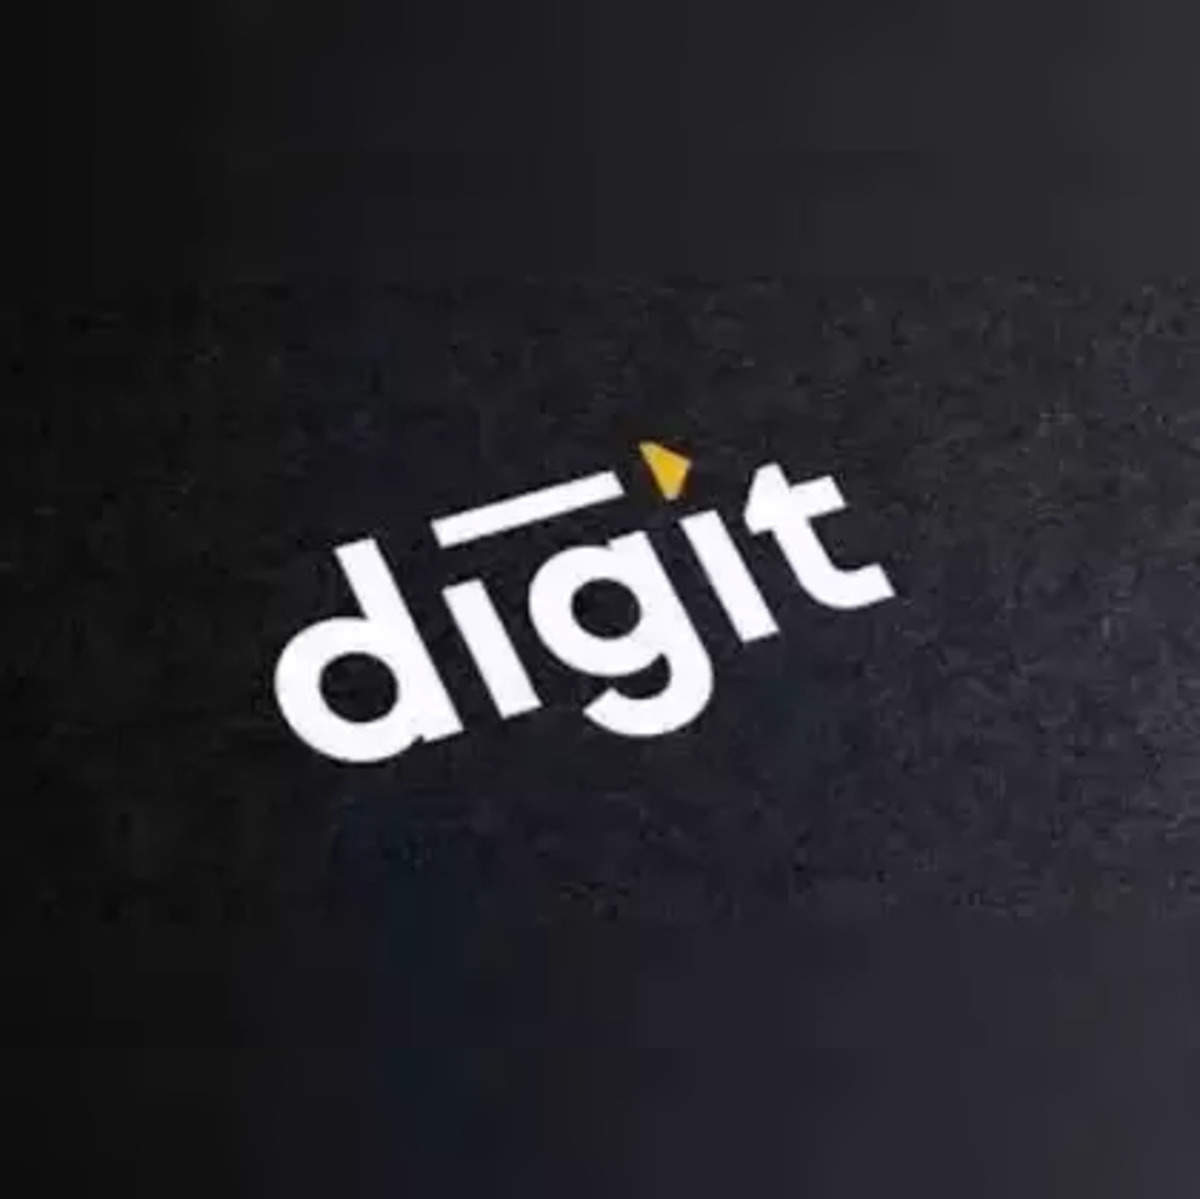 Help digit it services with a new logo | Logo design contest | 99designs